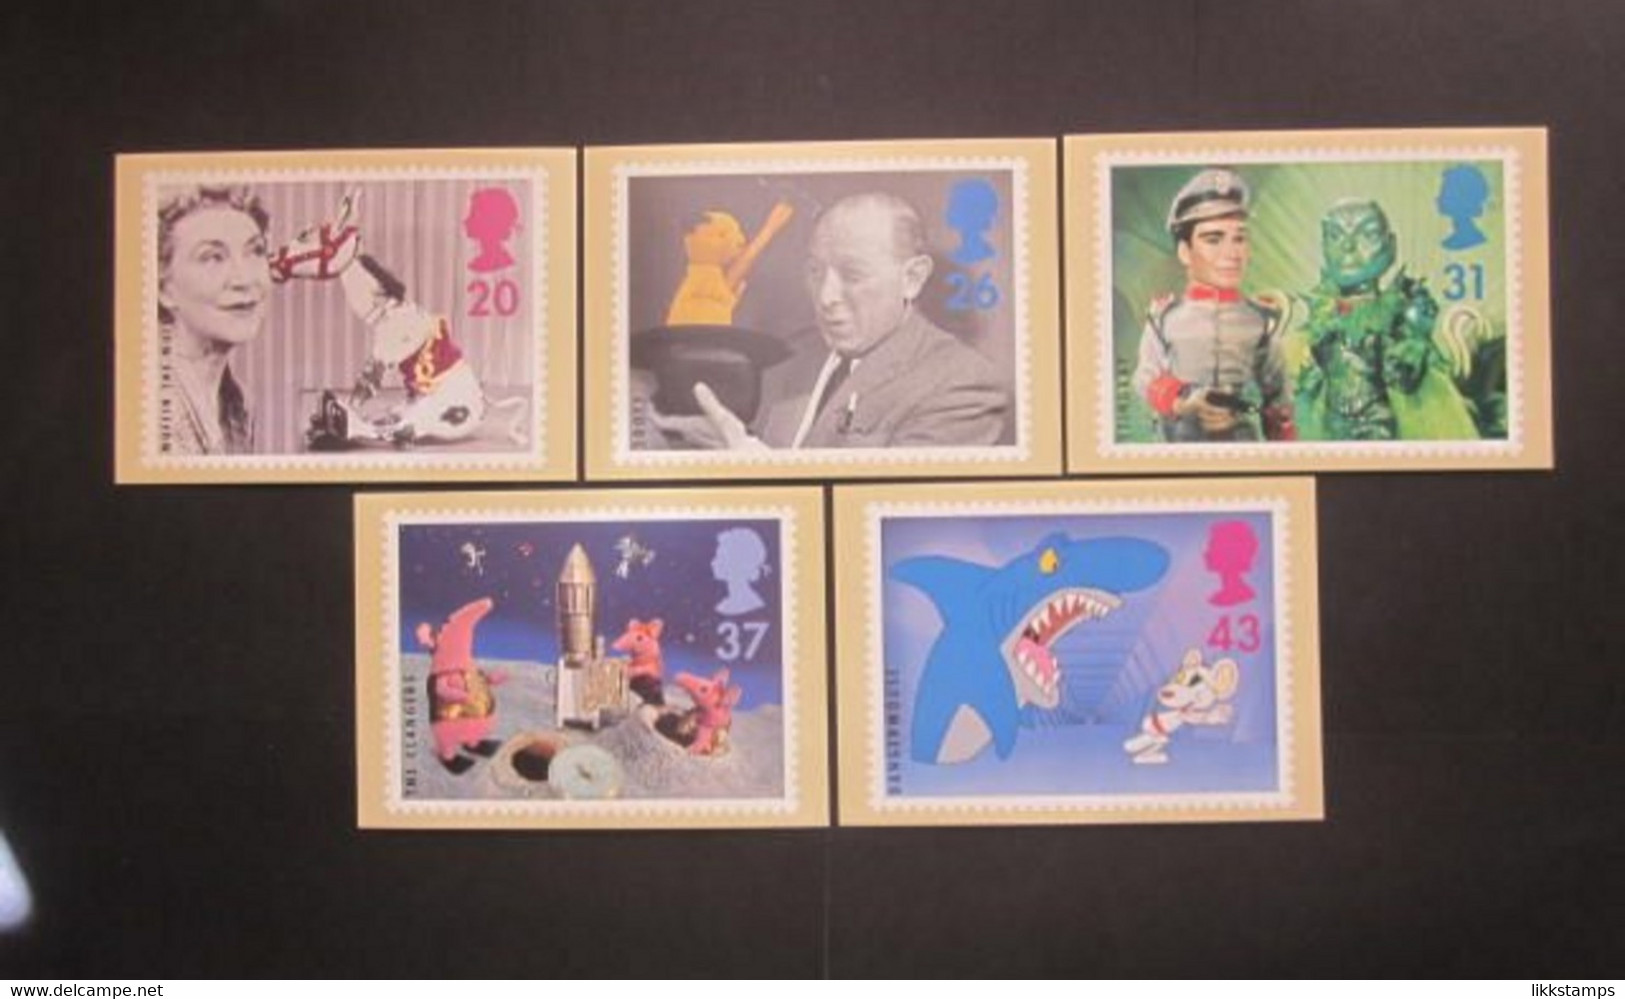 1996 THE 50th ANNIVERSARY OF CHILDREN'S TELEVISION P.H.Q. CARDS UNUSED, ISSUE No. 182 (B) #01027 - PHQ Karten